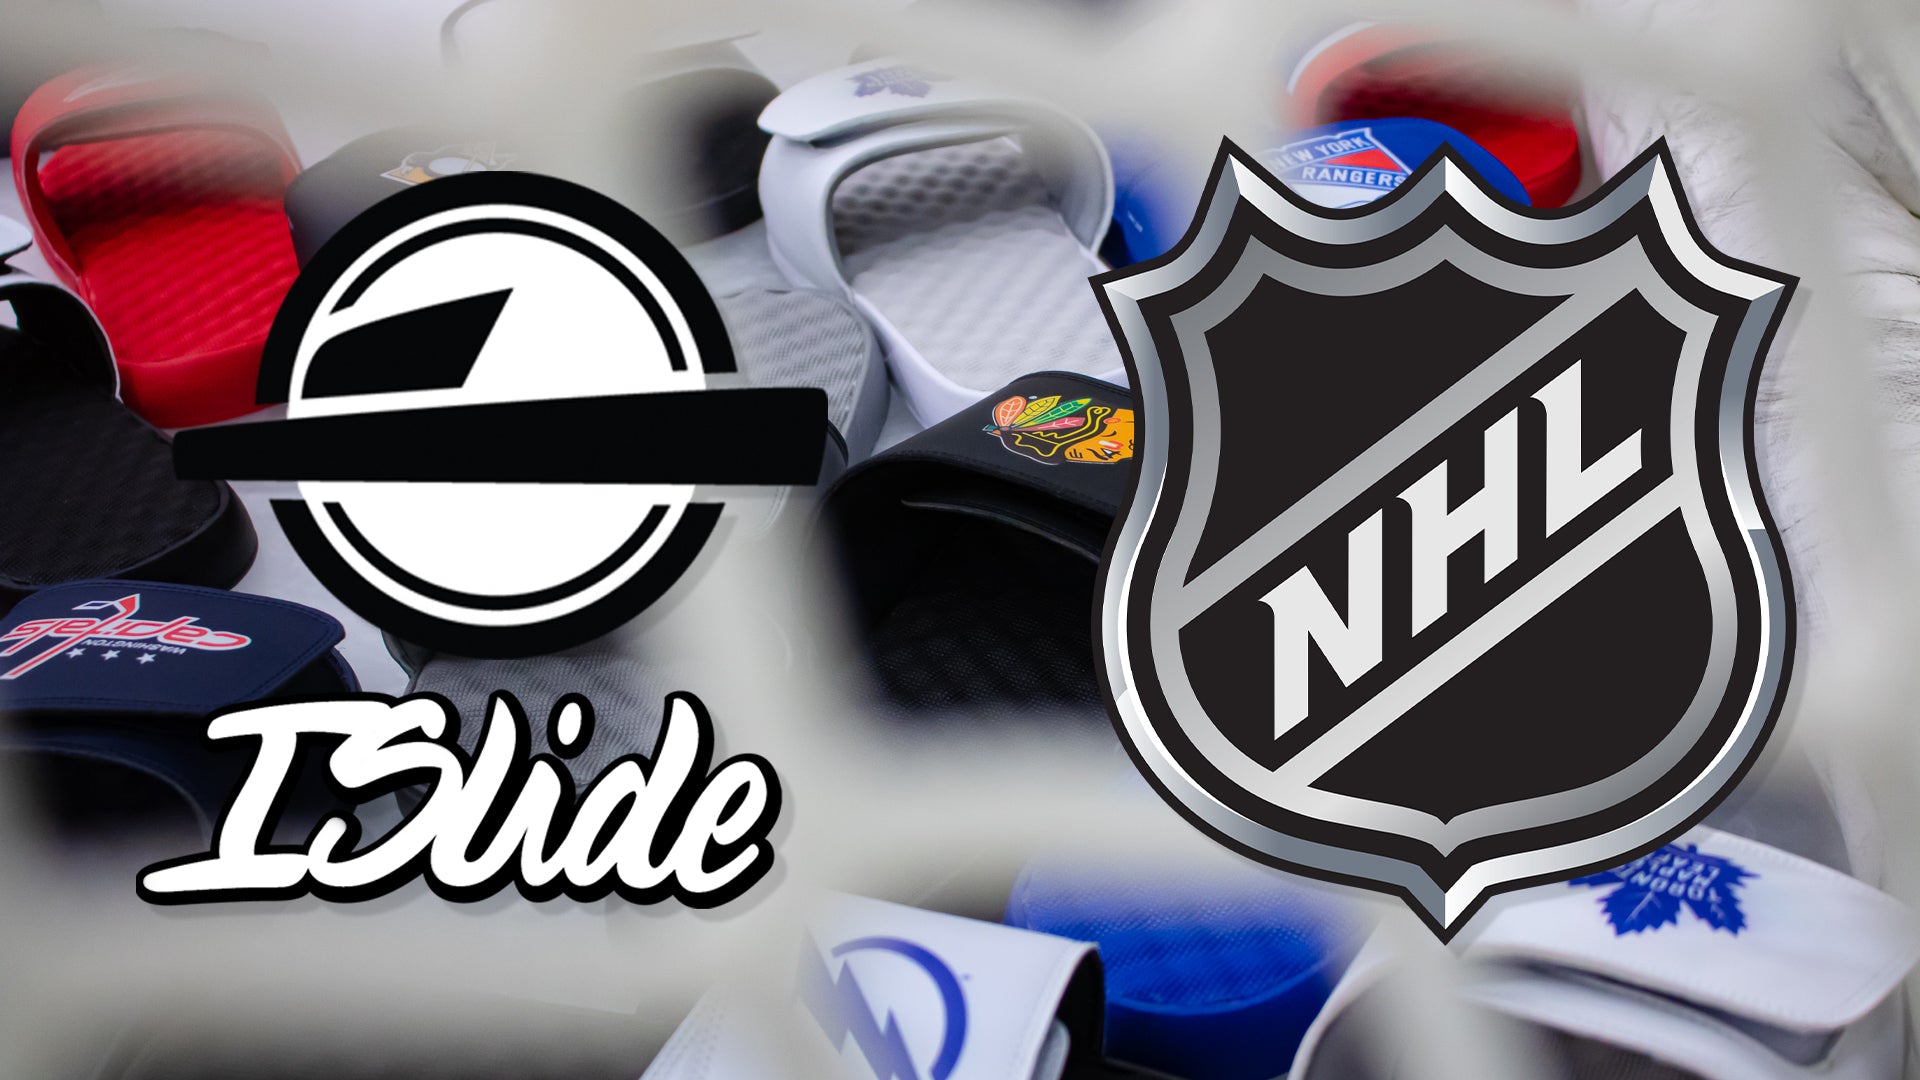 CUSTOM FOOTWEAR BRAND ISLIDE LANDS THIRD MAJOR SPORTS LICENSE  WITH NEW NHL LICENSING AGREEMENT